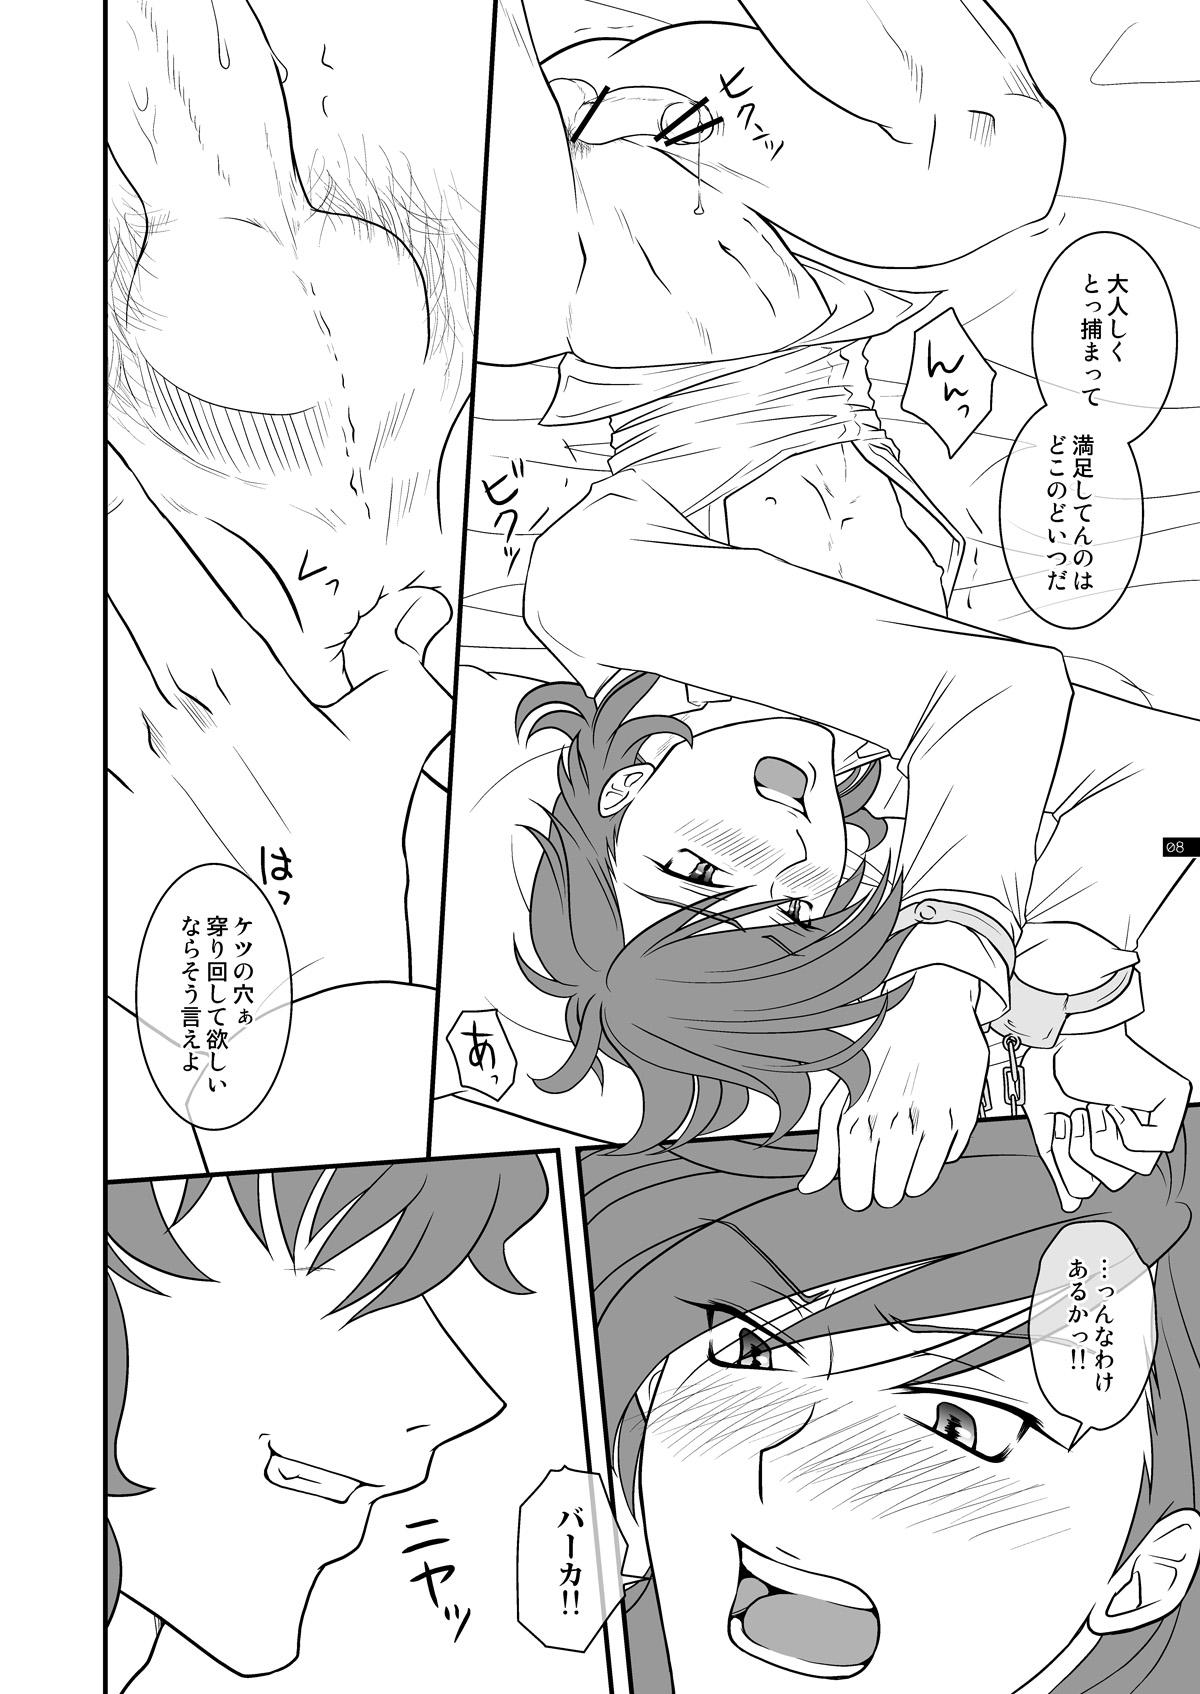 Interracial SWEET - Gundam 00 Eating Pussy - Page 7